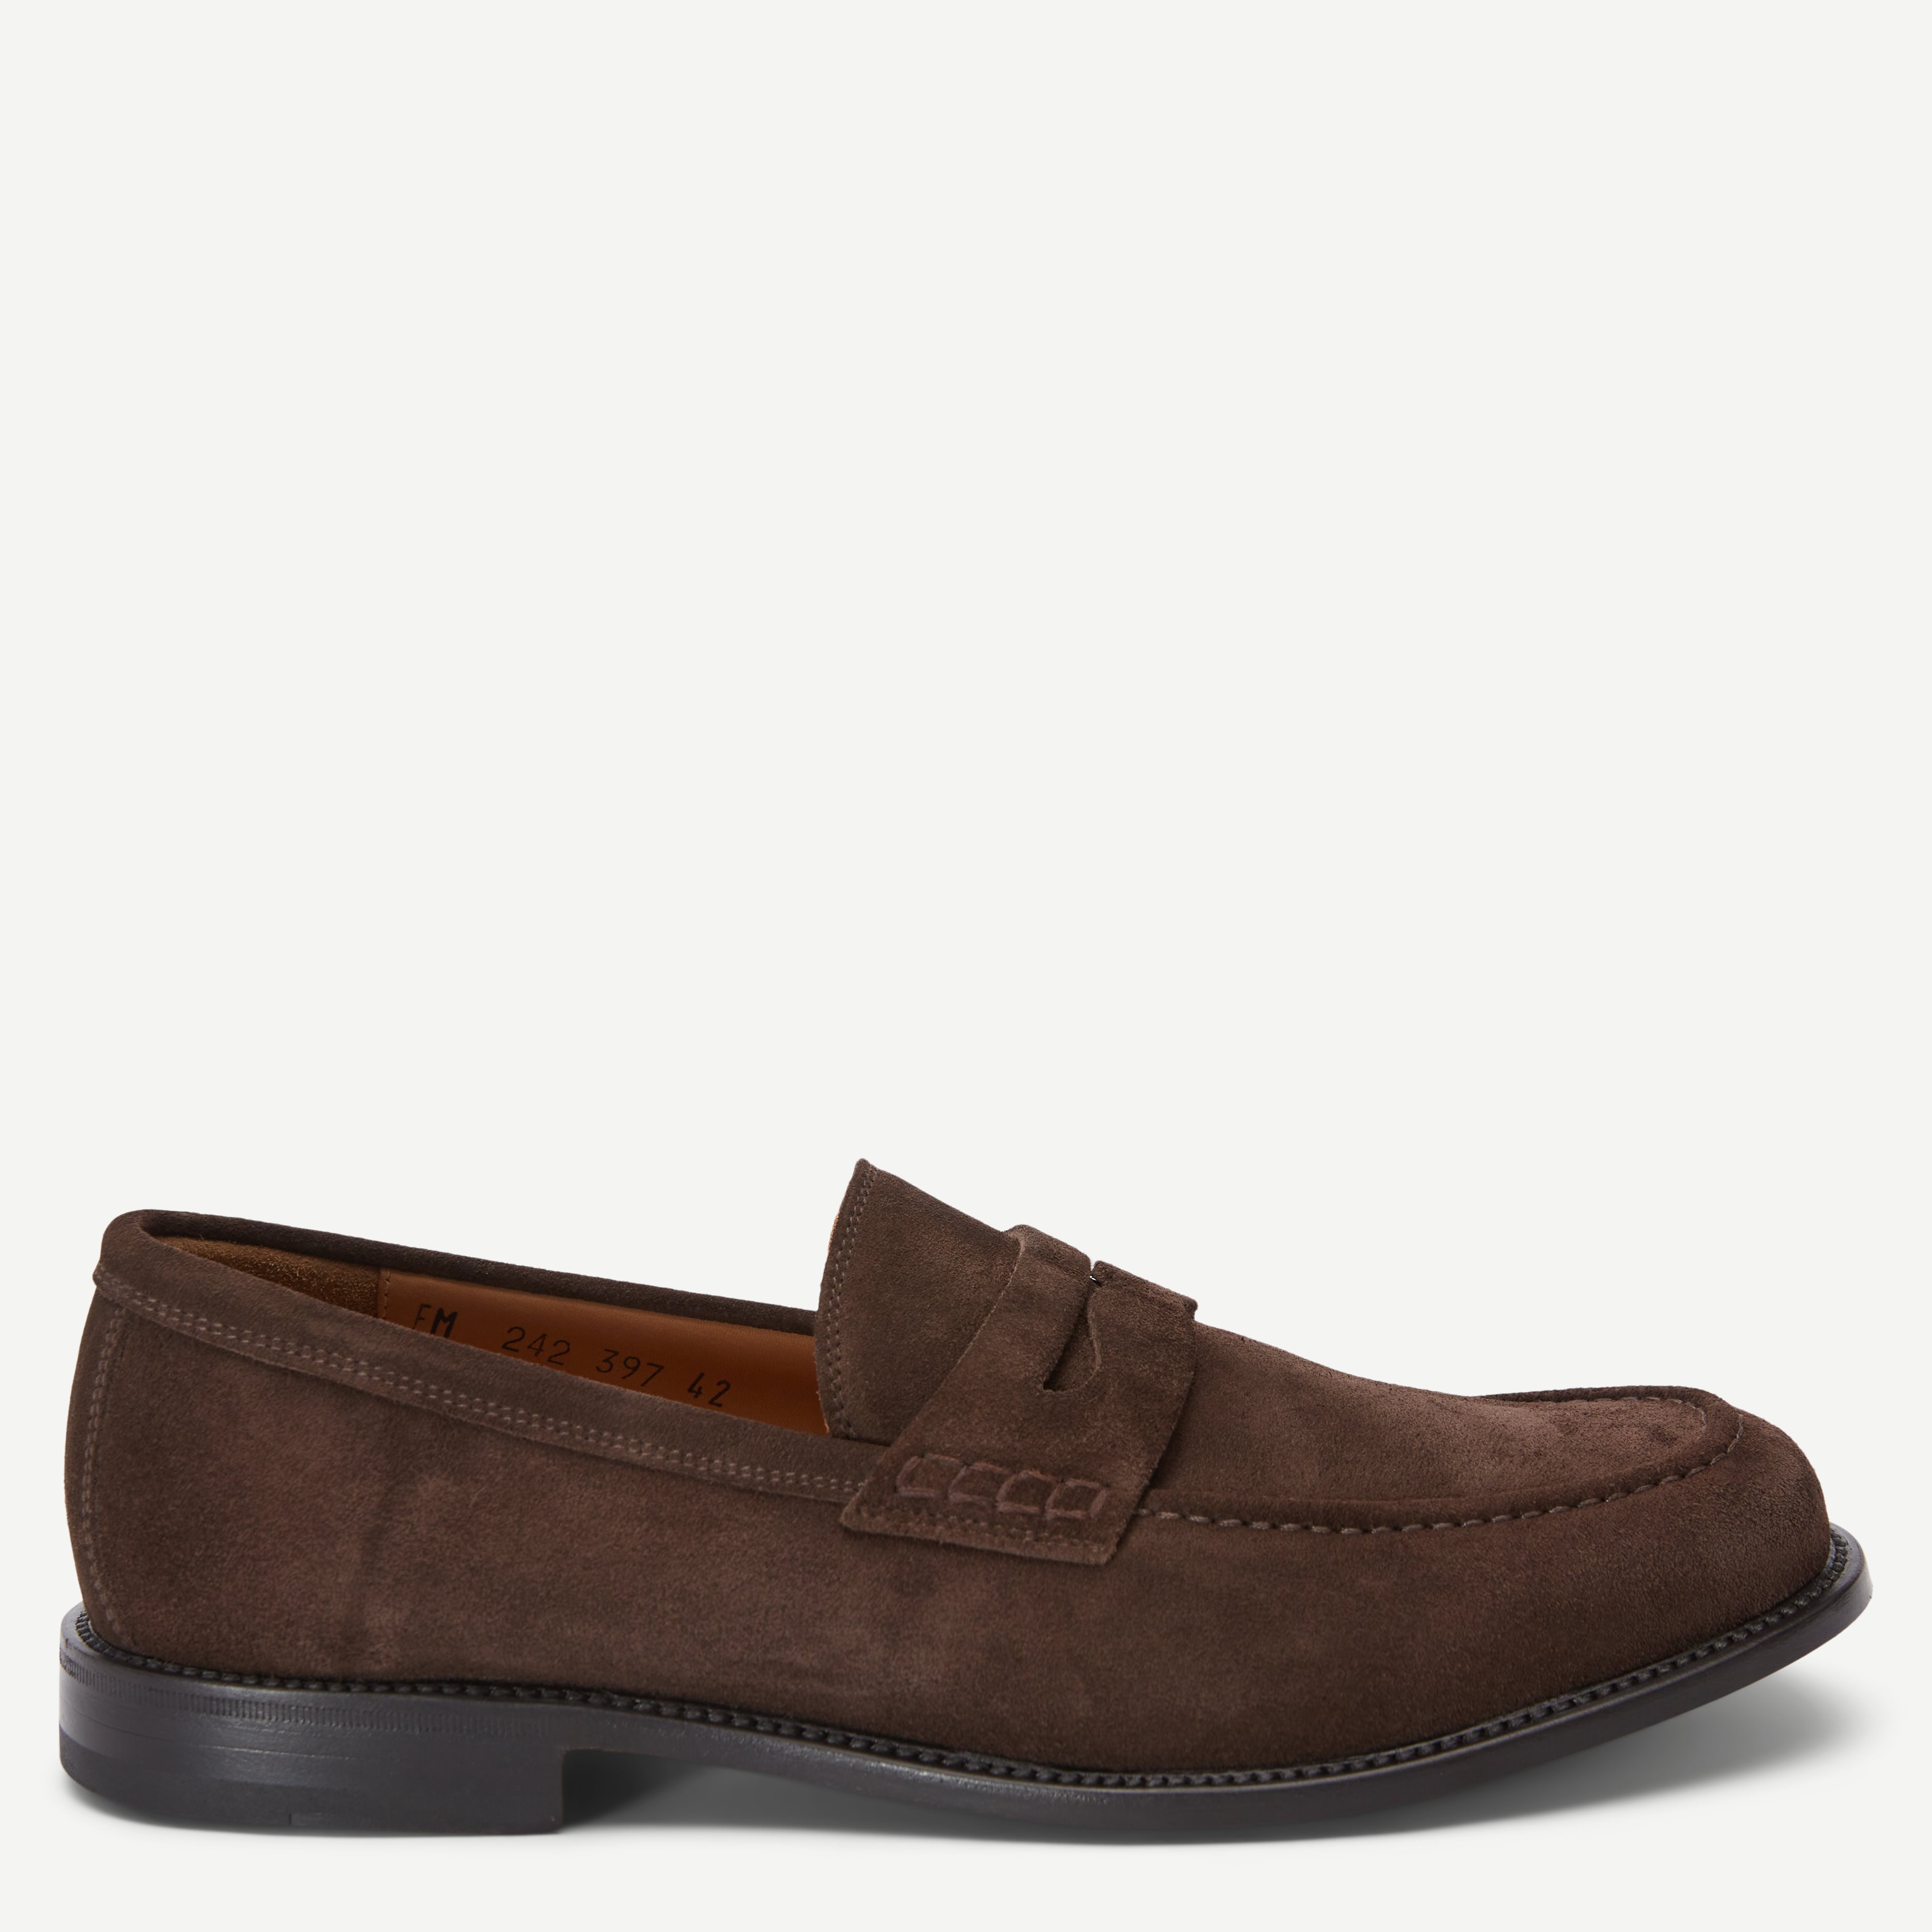 Sand Shoes F397 2401 Brown